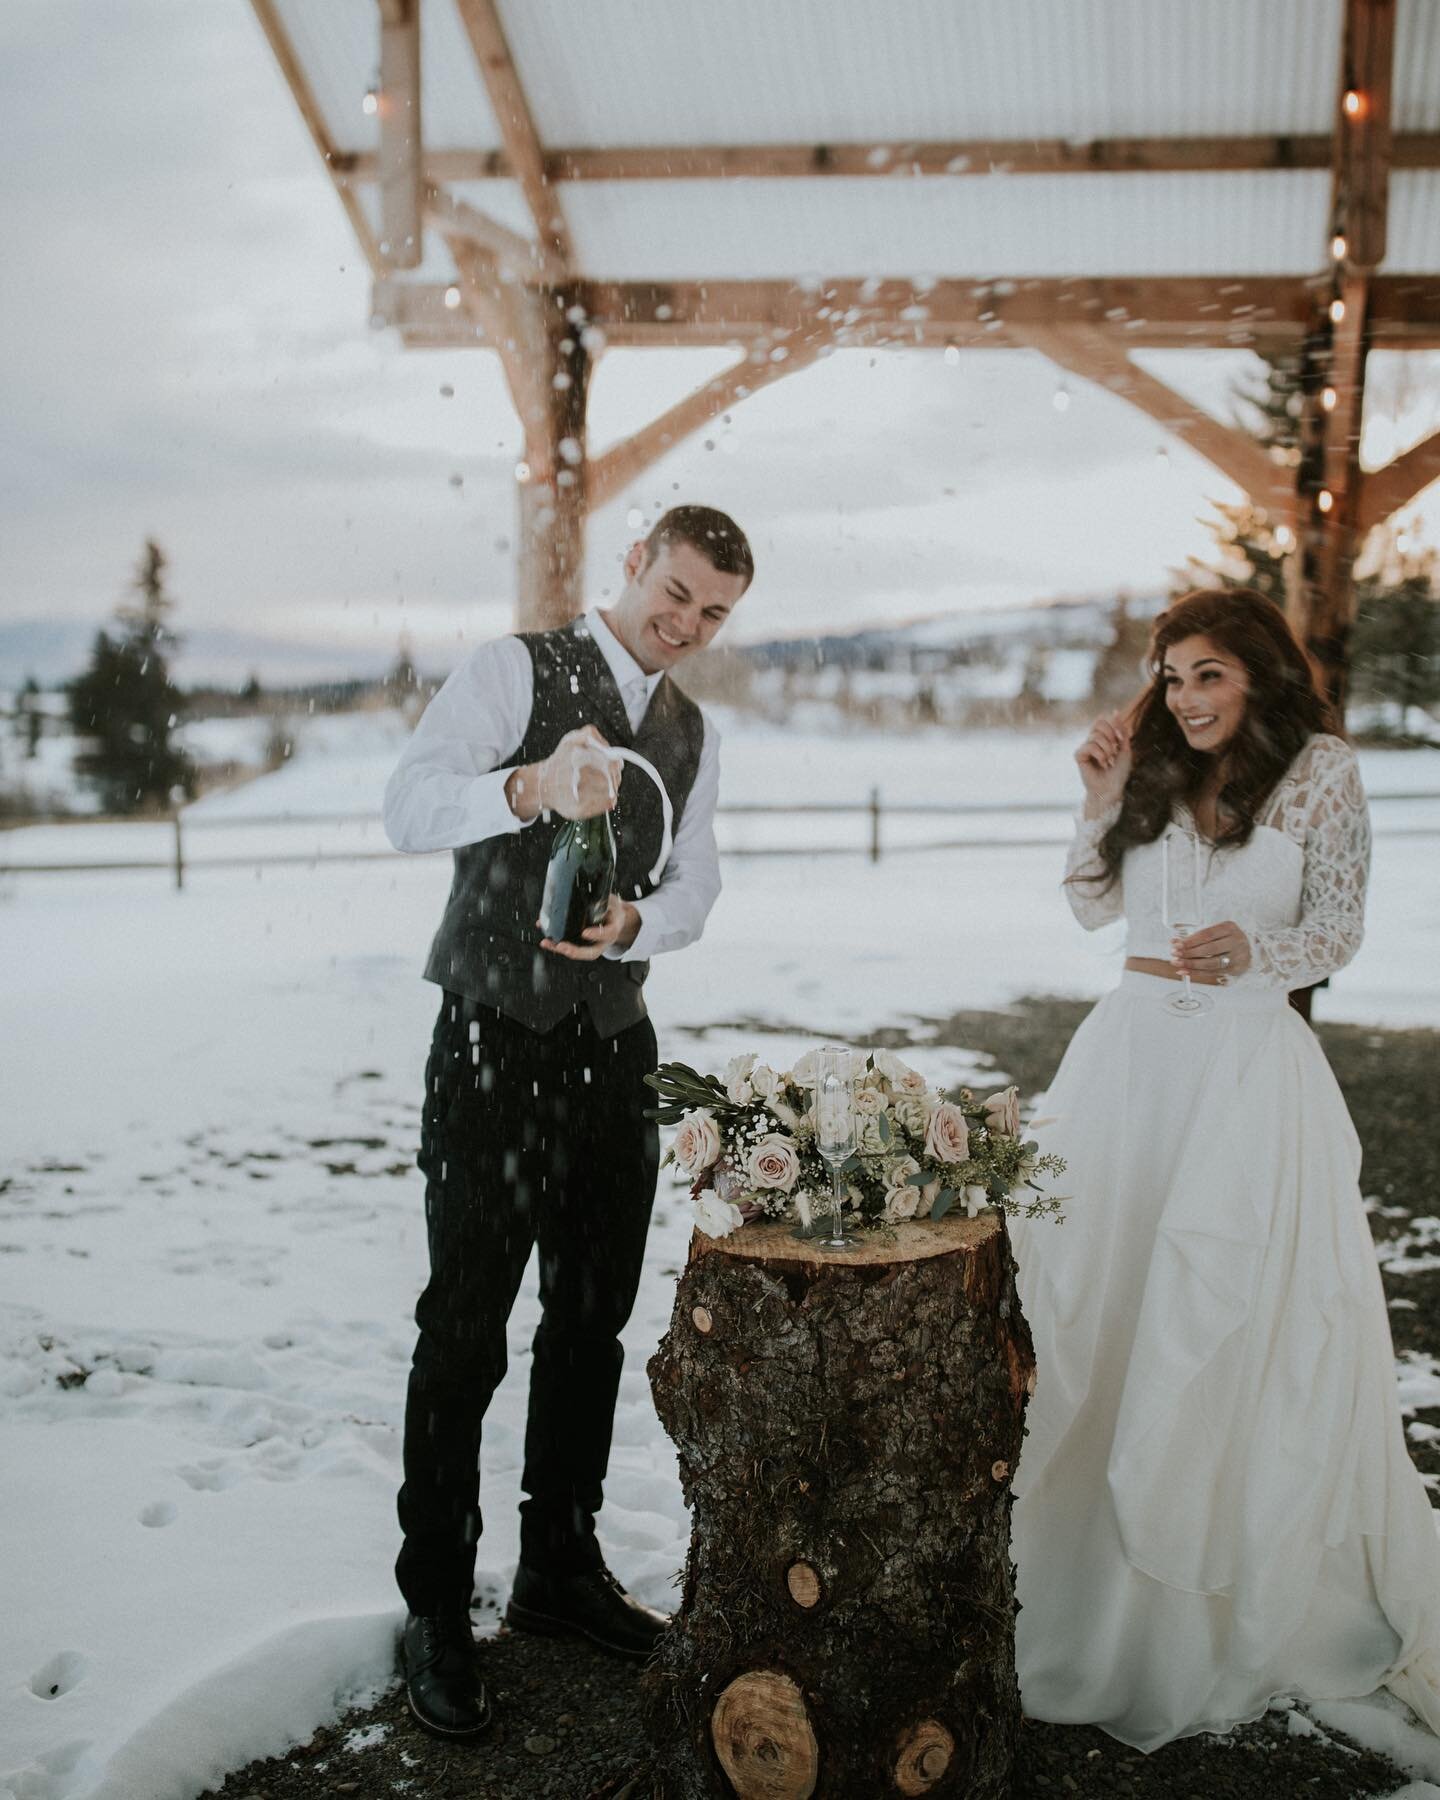 Is it the weekend yet? Feeling antsy to pop some bubbly like these love birds. This elopement still warms my heart. Photos by @joshuaveldstra venue @akdiamondj HMUA @amiestylist Hair extensions @emarosehair florals and styling by yours truly! Bride @